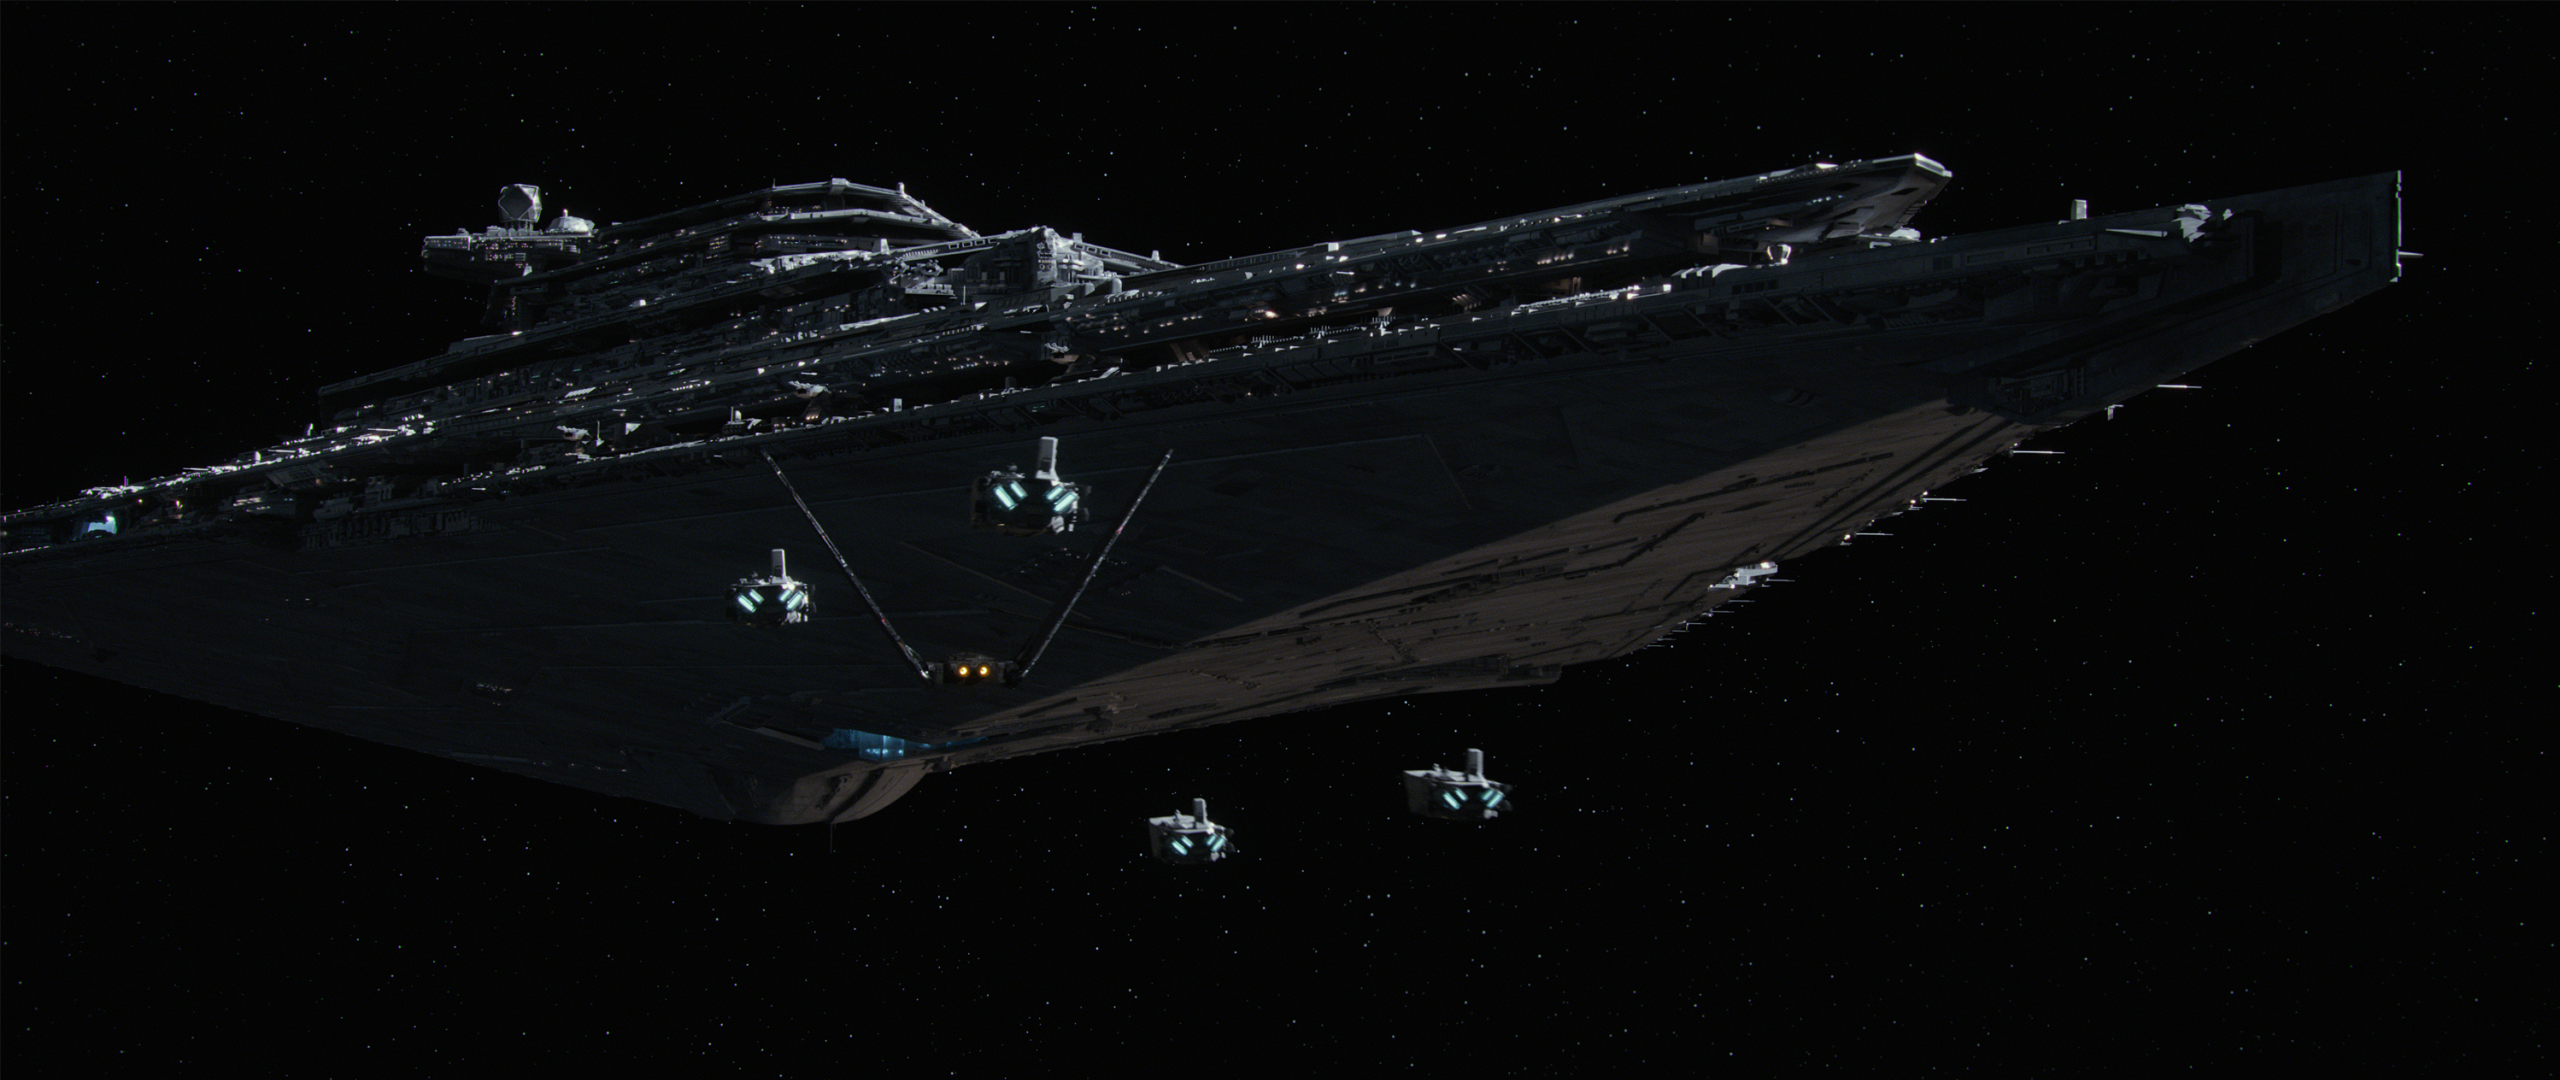 General 2560x1080 Star Wars science fiction Star Wars Ships Star Wars: The Force Awakens The First Order movies vehicle spaceship